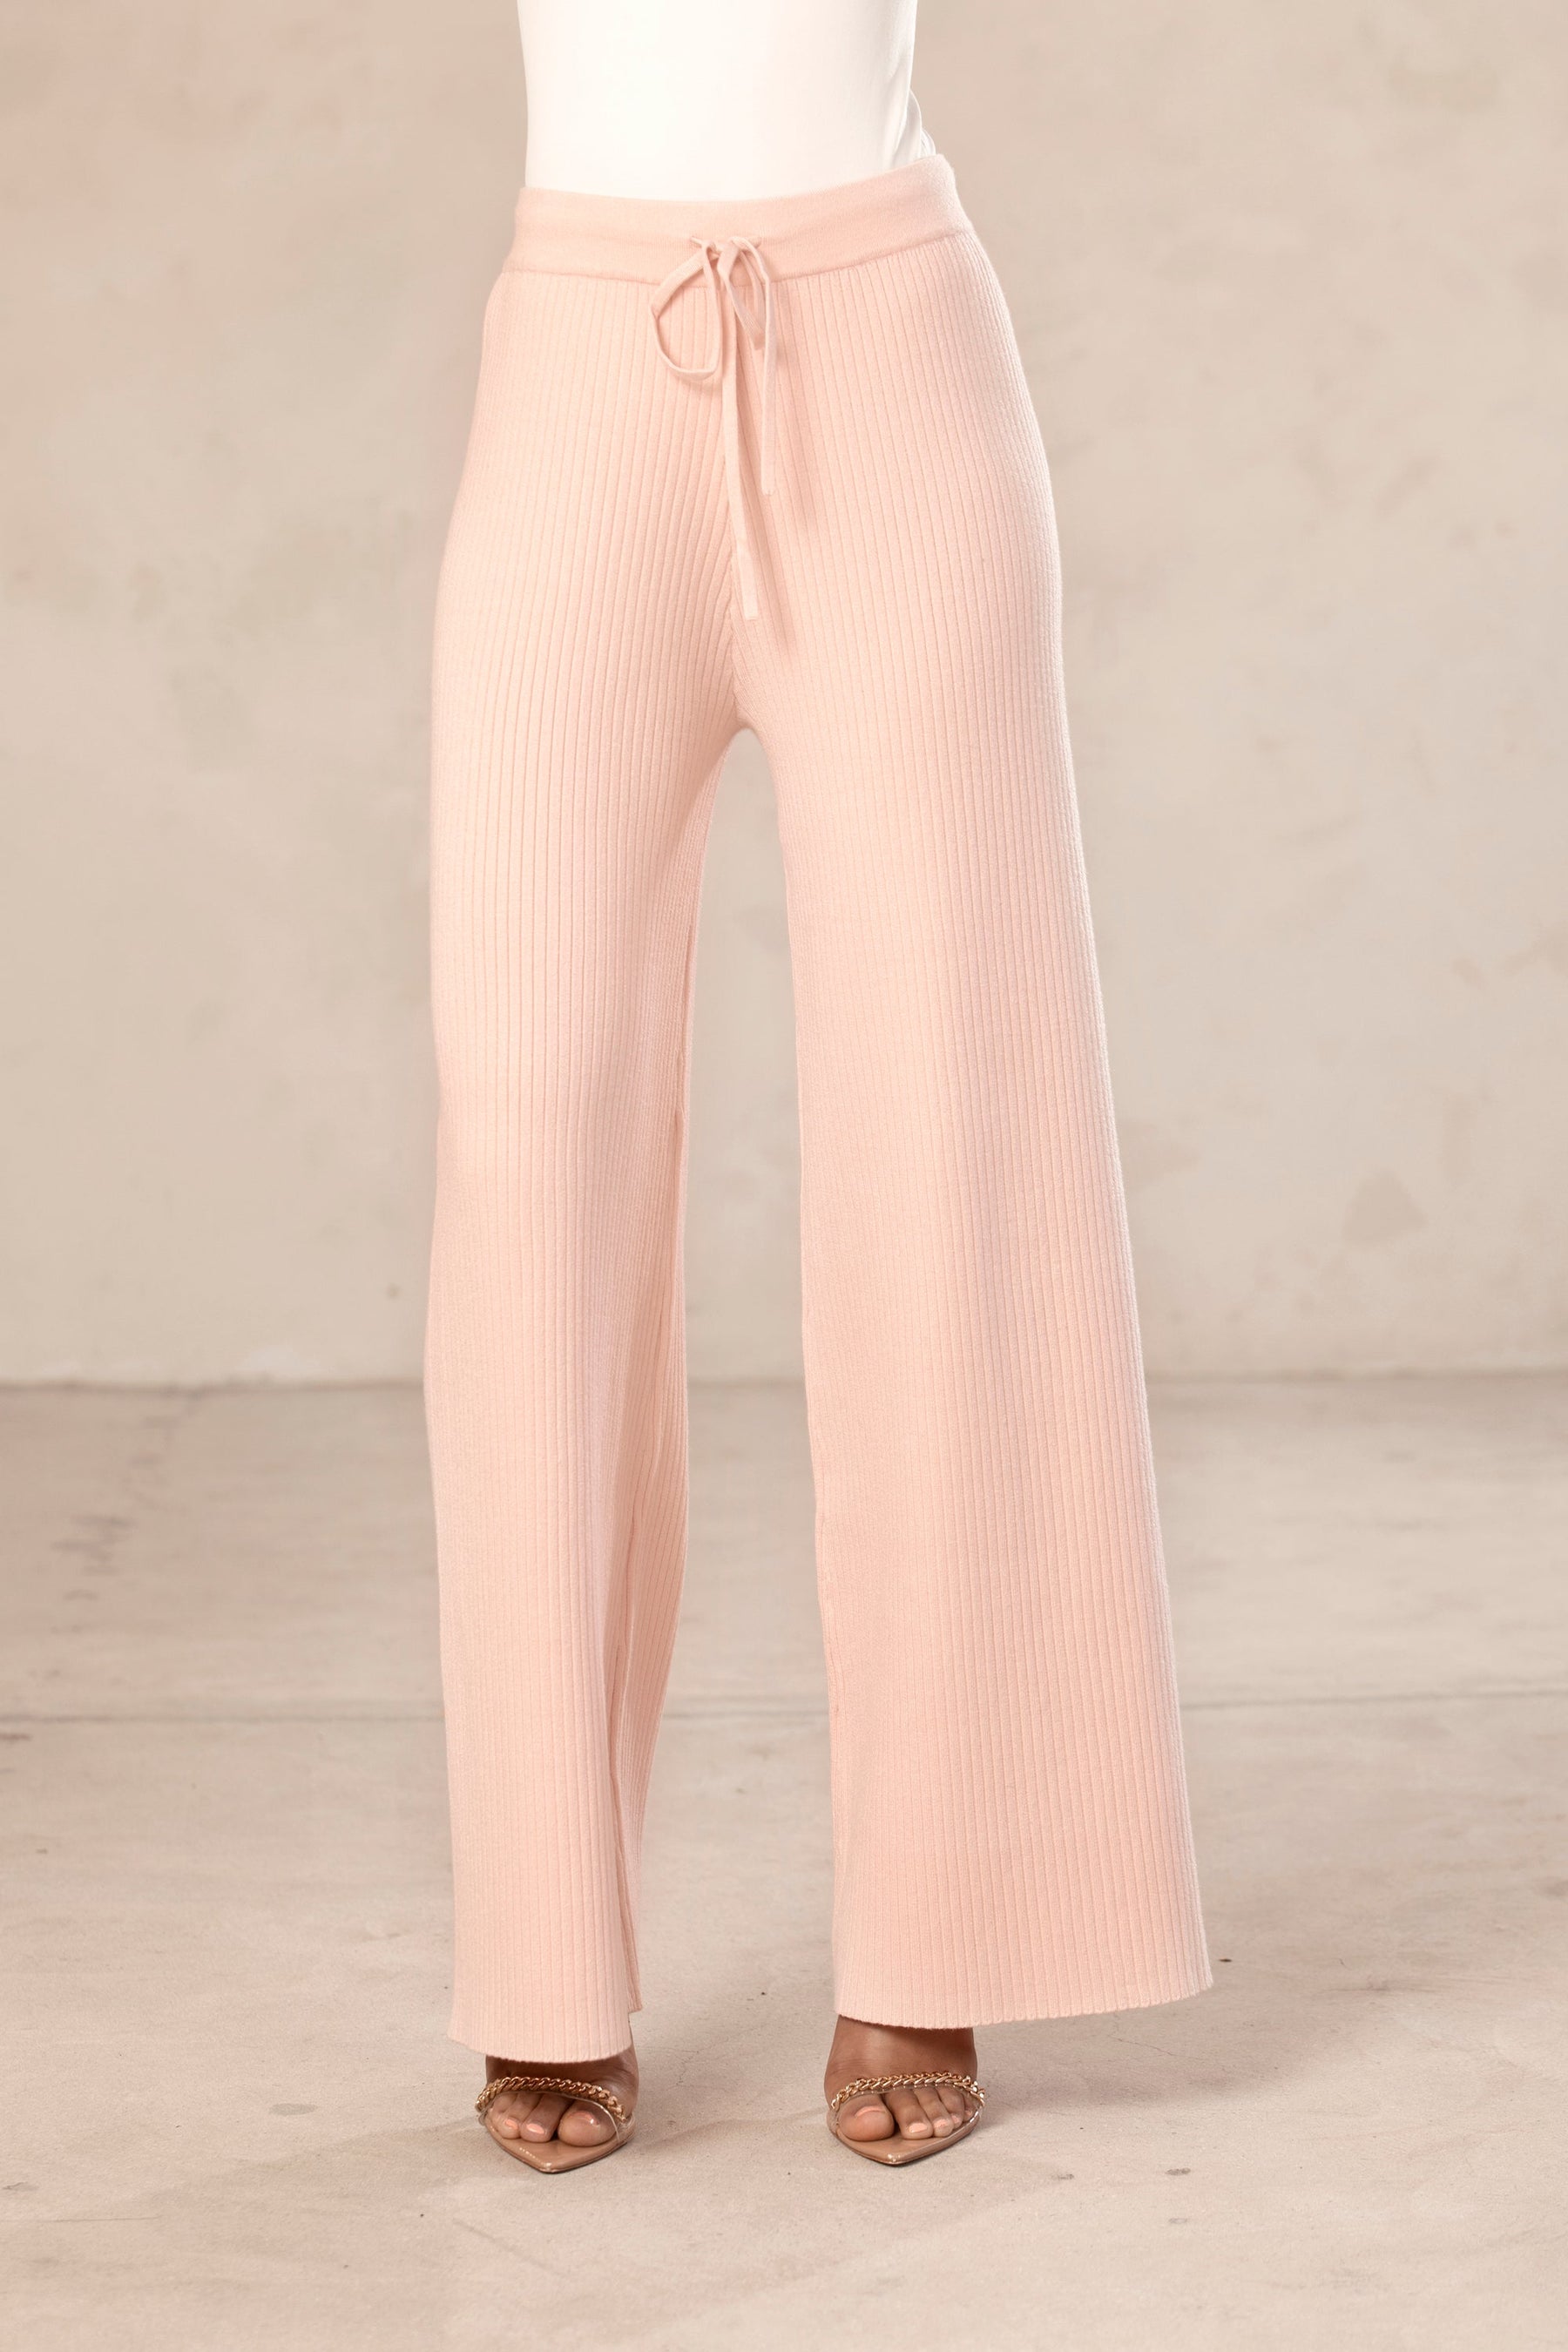 Unwritten Love Knit Pants in Baby Pink